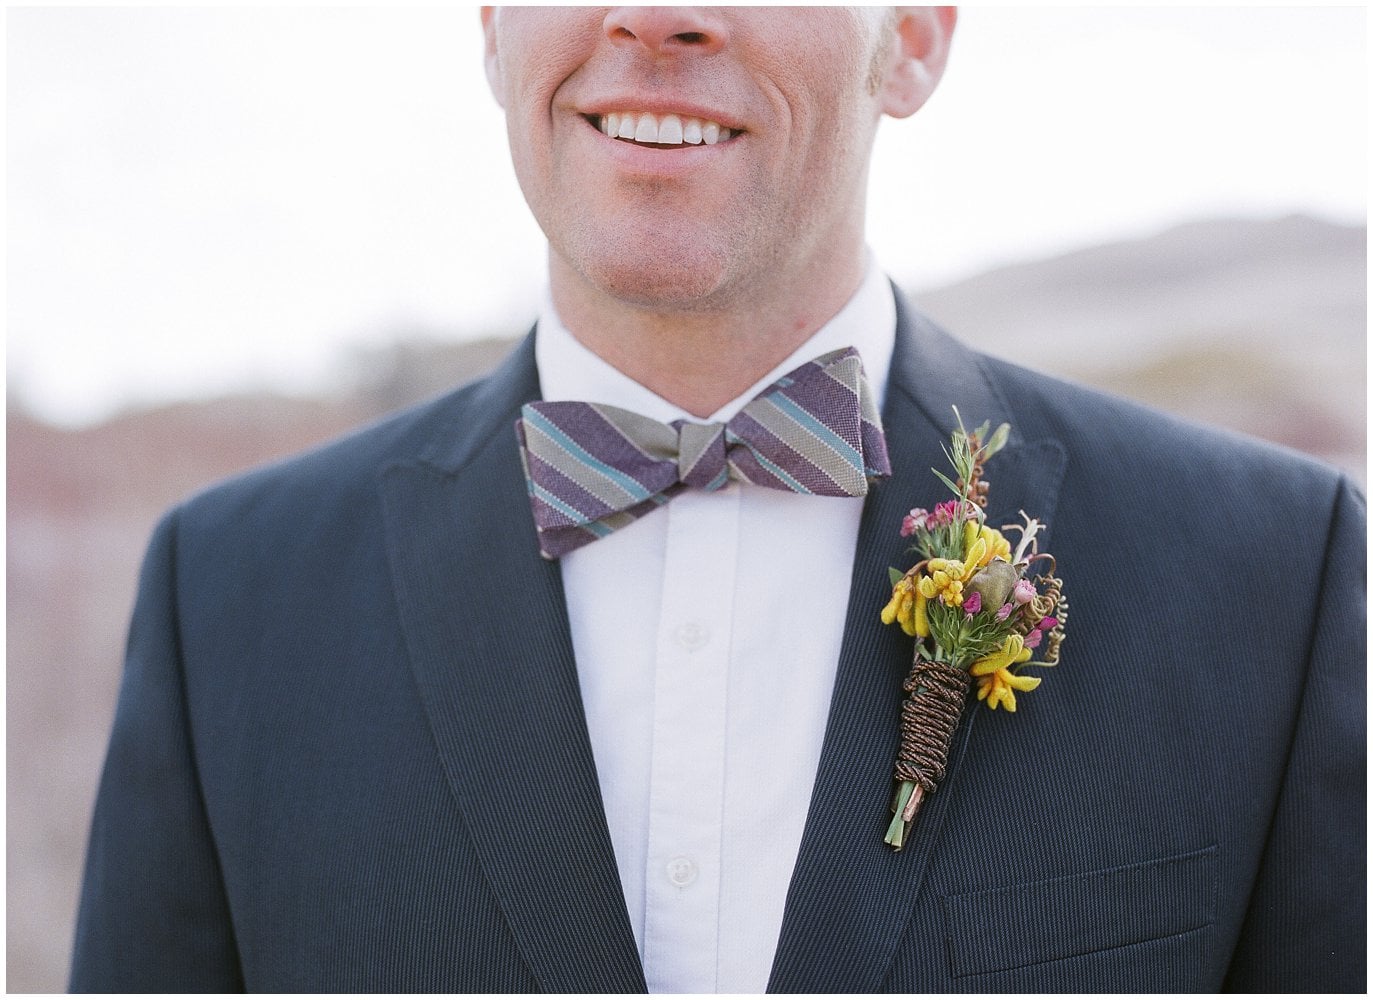 bowtie and boutonniere on groom